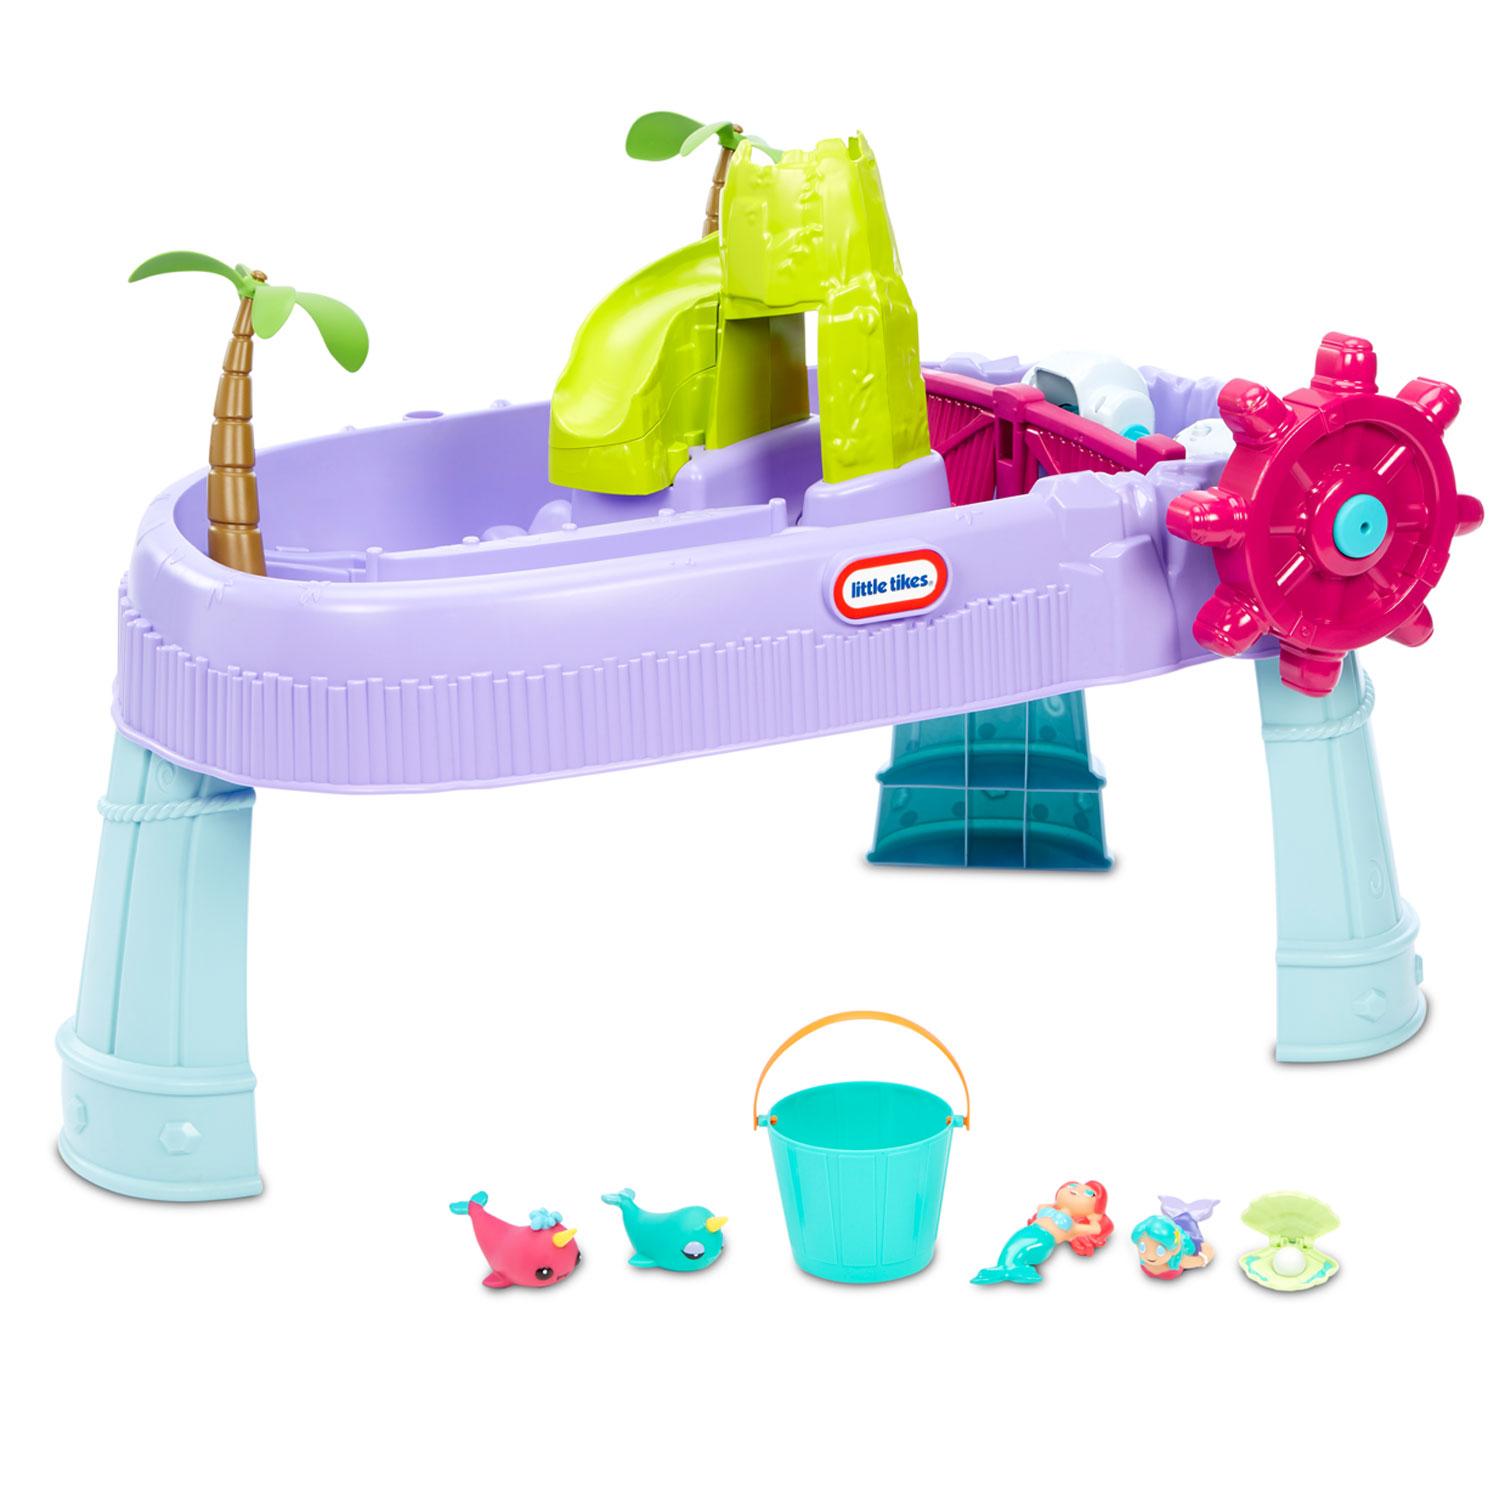 little tikes fishing water table